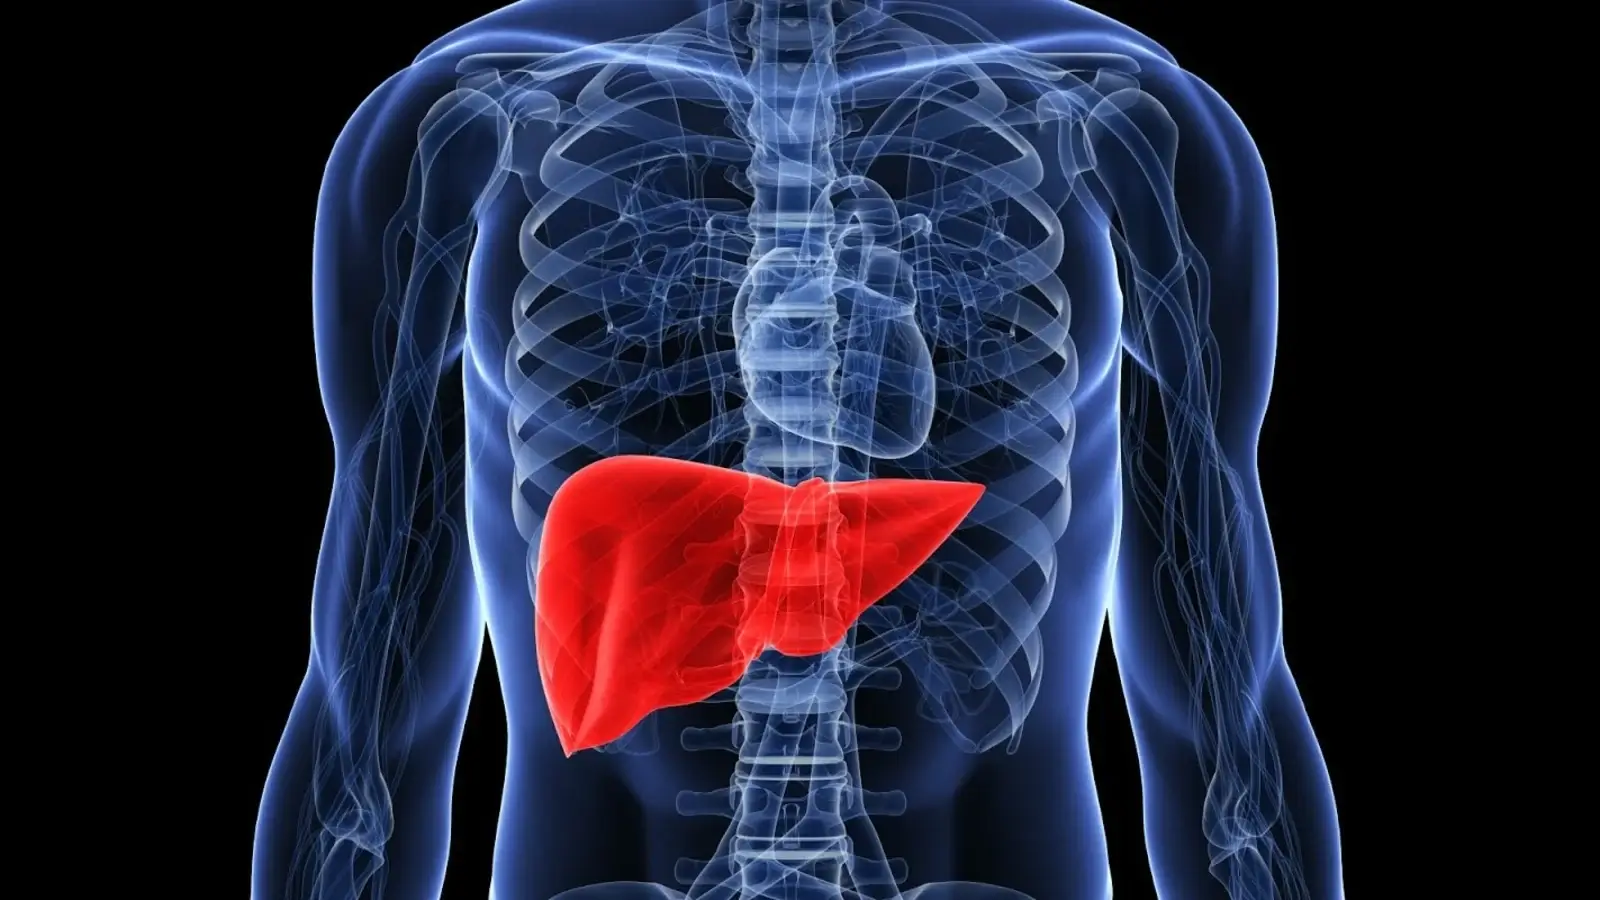 know factors responsible for failure of the liver and how to overcome them